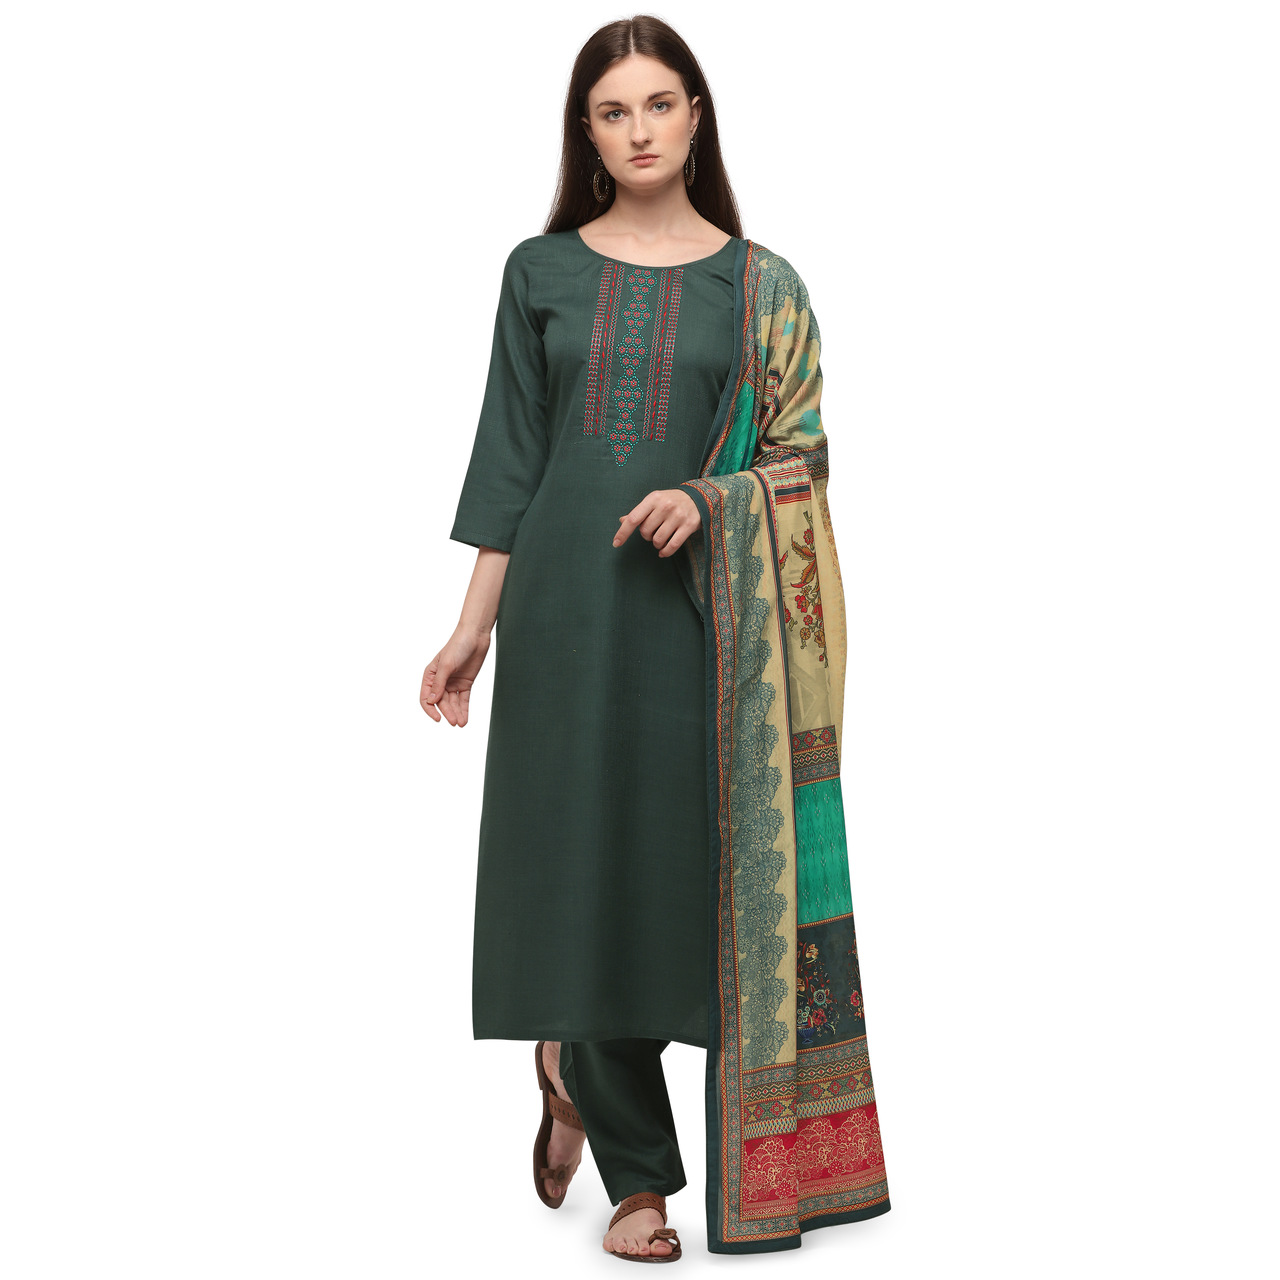 Colorbar Cotton With Embroidery Work Dress Material At Whole...